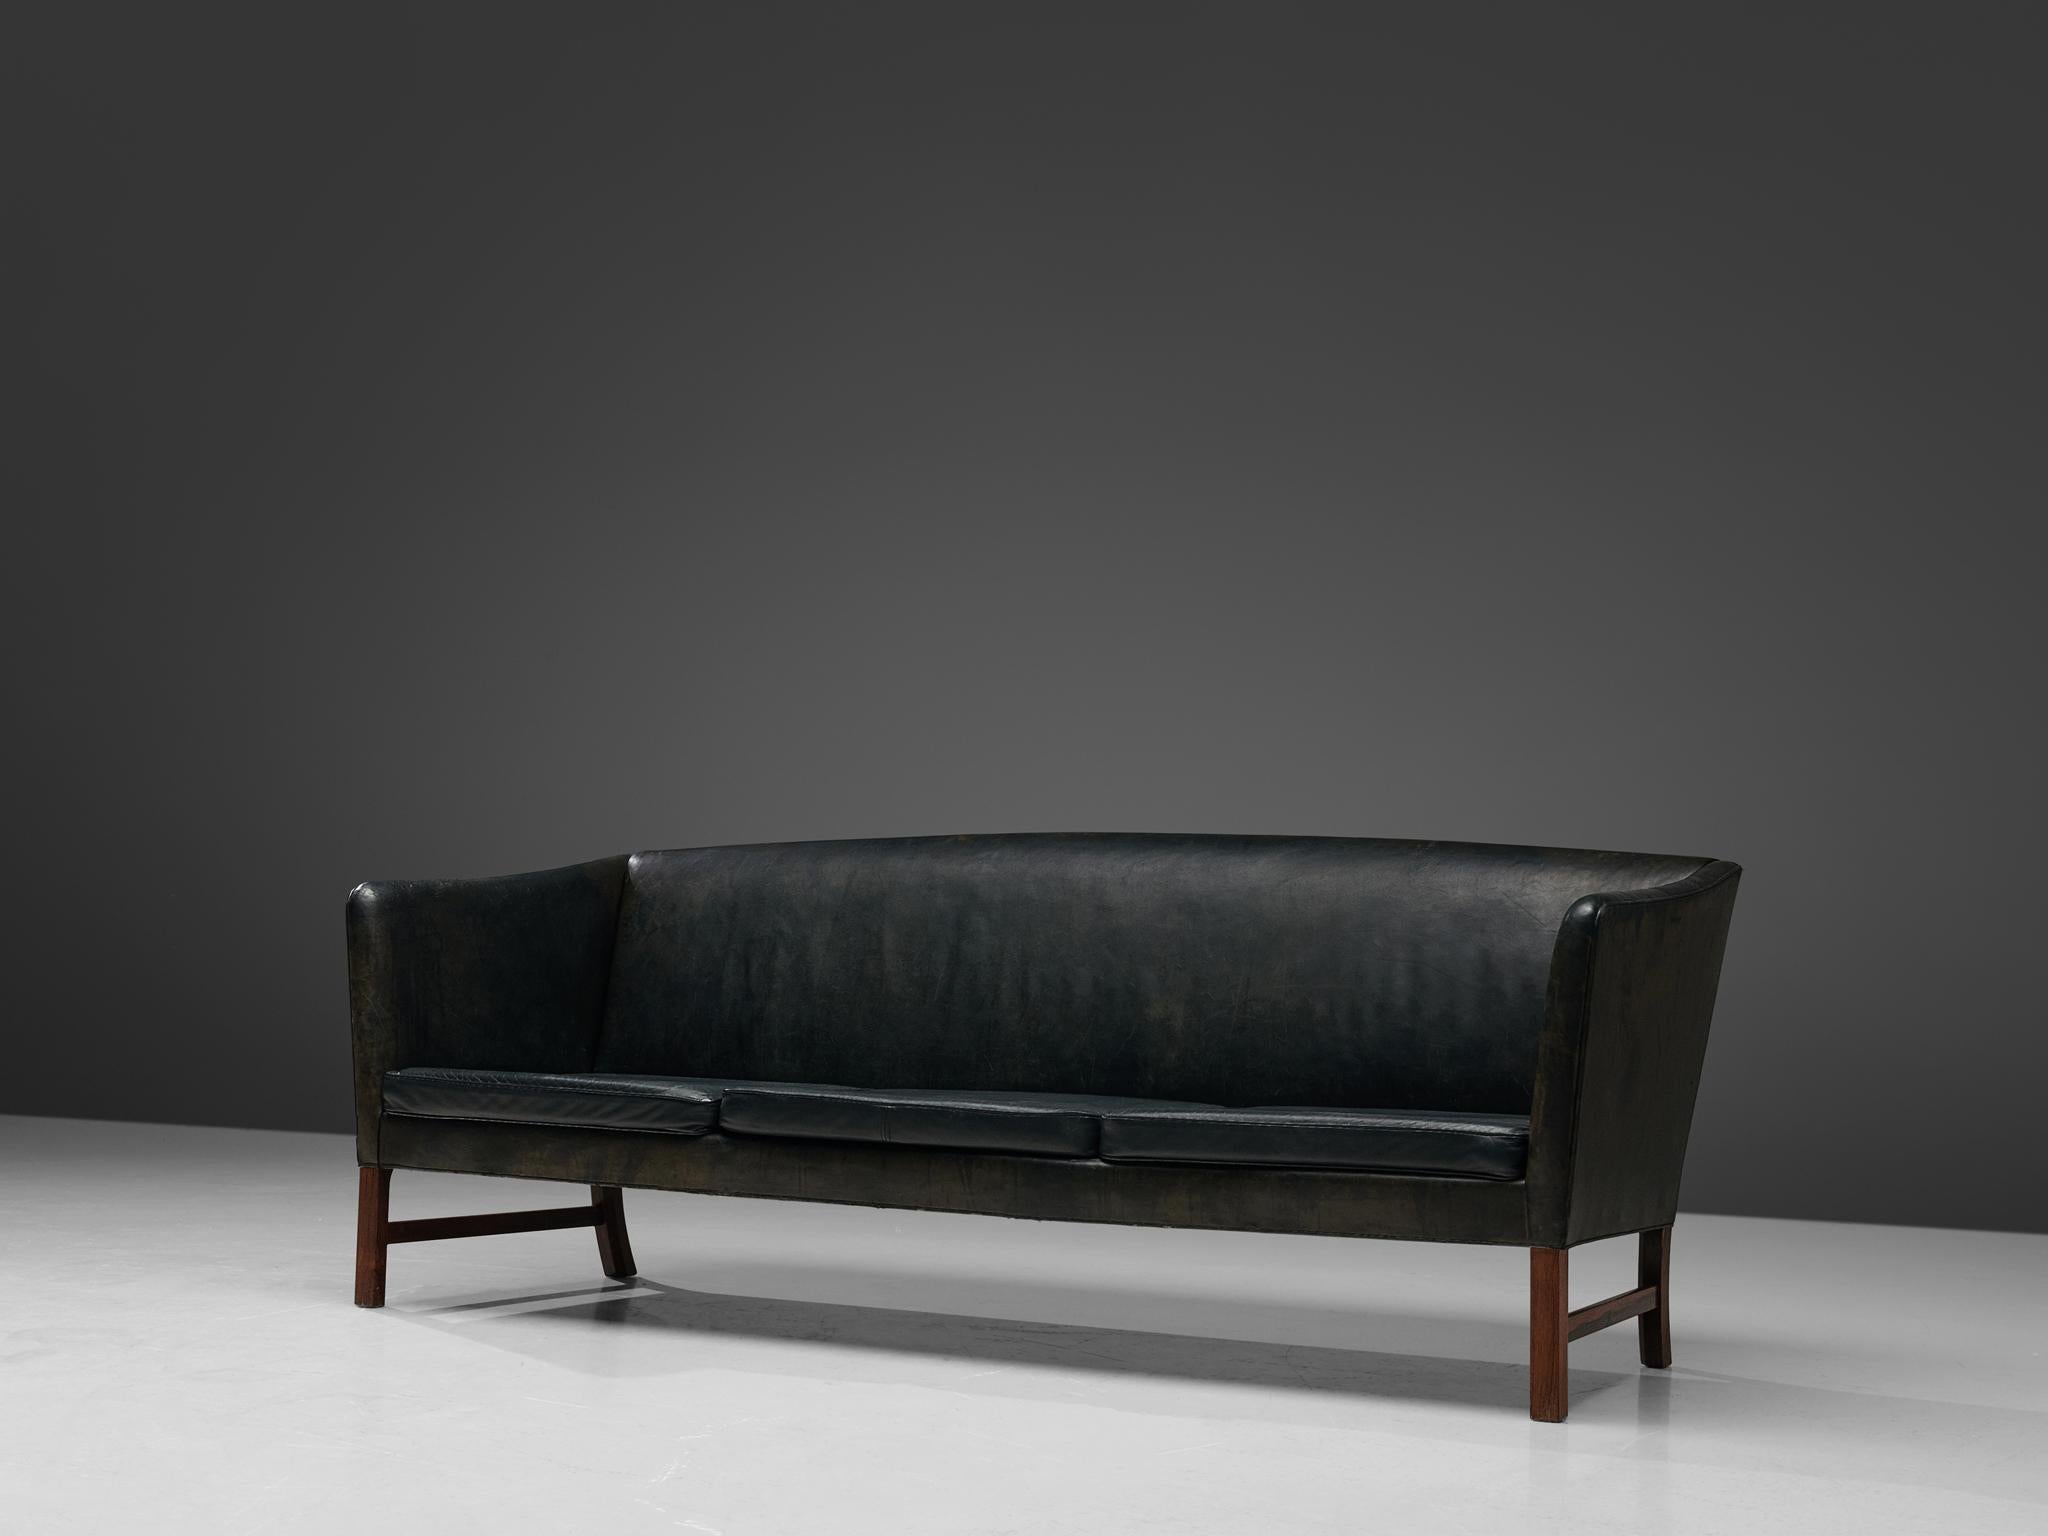 Ole Wanscher for P. Jeppesen, three-seat '603' sofa for reupholstery, leather and rosewood, Denmark, 1960s.

A Classic design redolent of both English and oriental furniture-art designed by Ole Wanscher. It has a Minimalist, timeless appearance